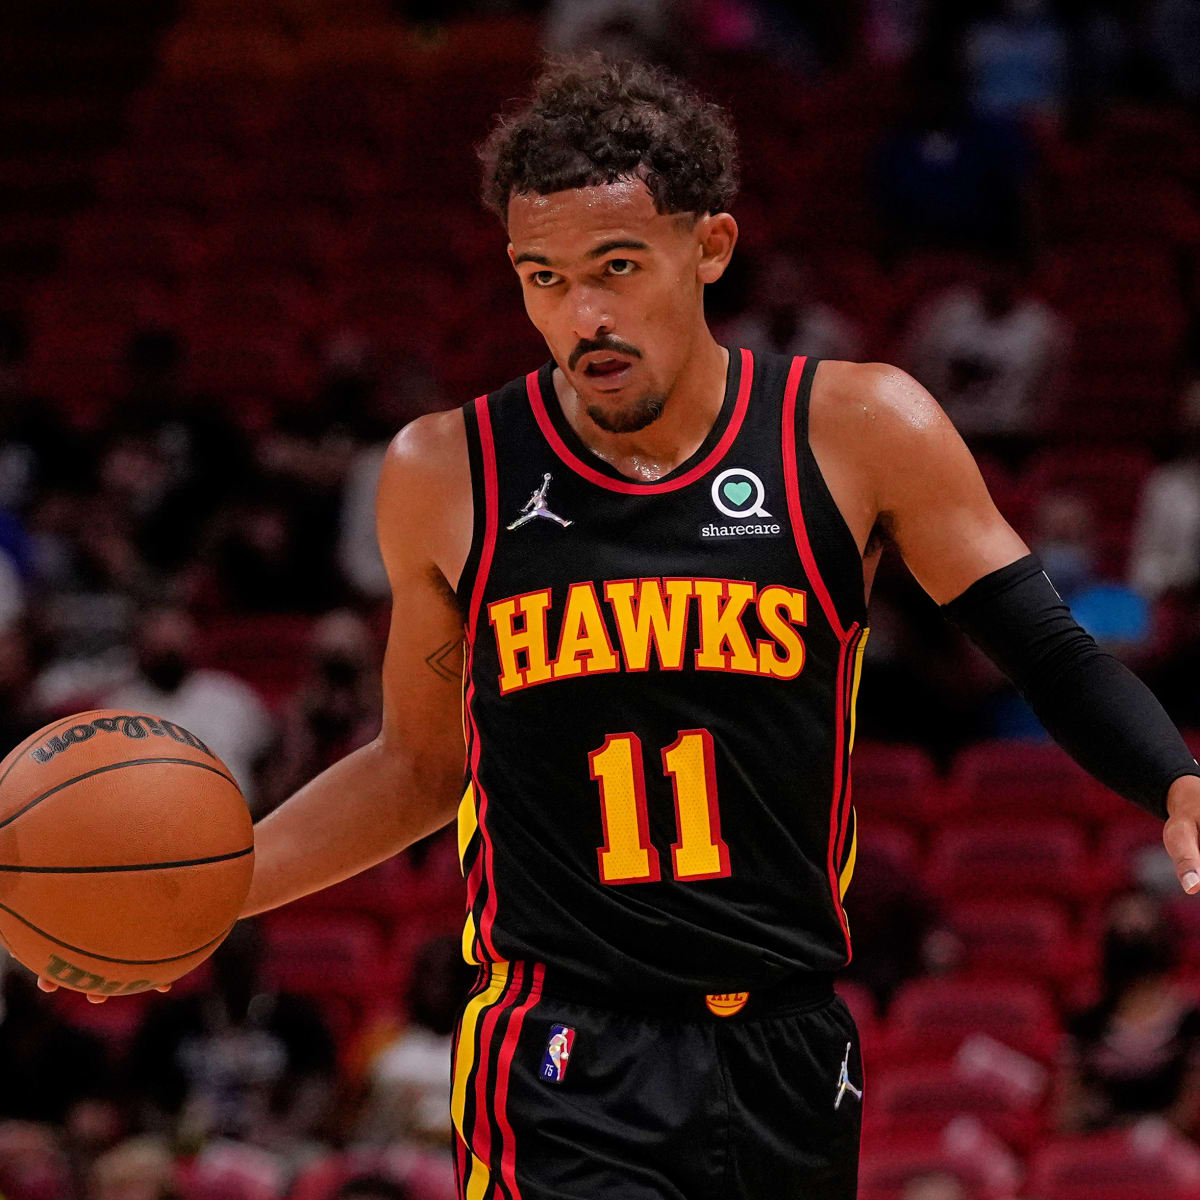 men trae young jersey